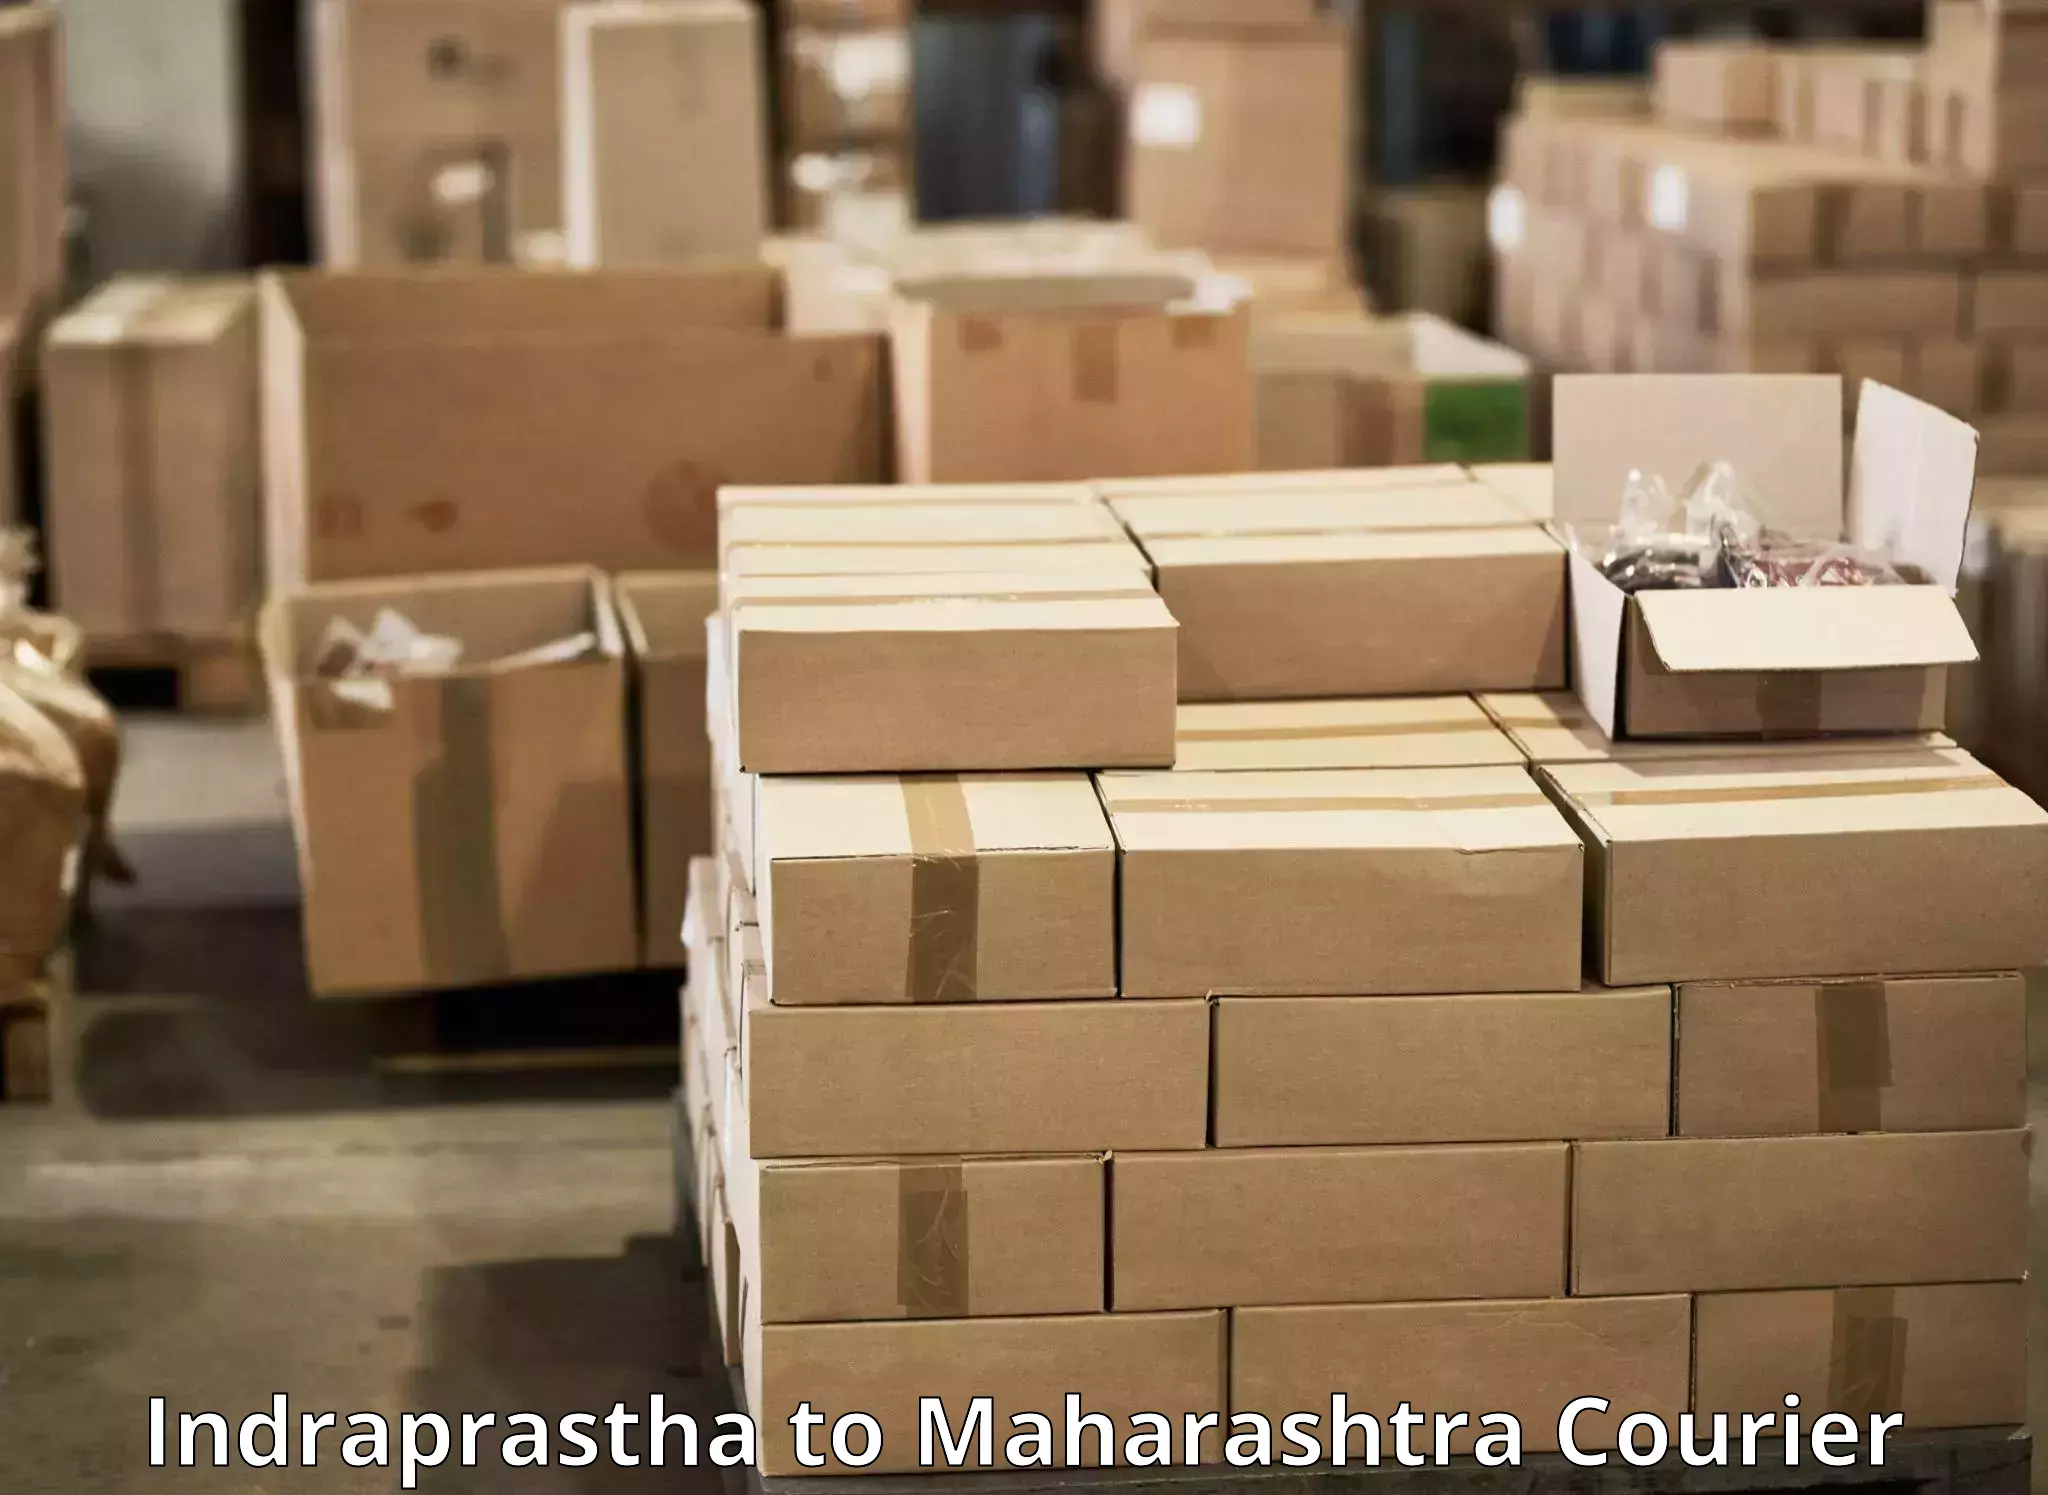 Express delivery capabilities in Indraprastha to Wardha